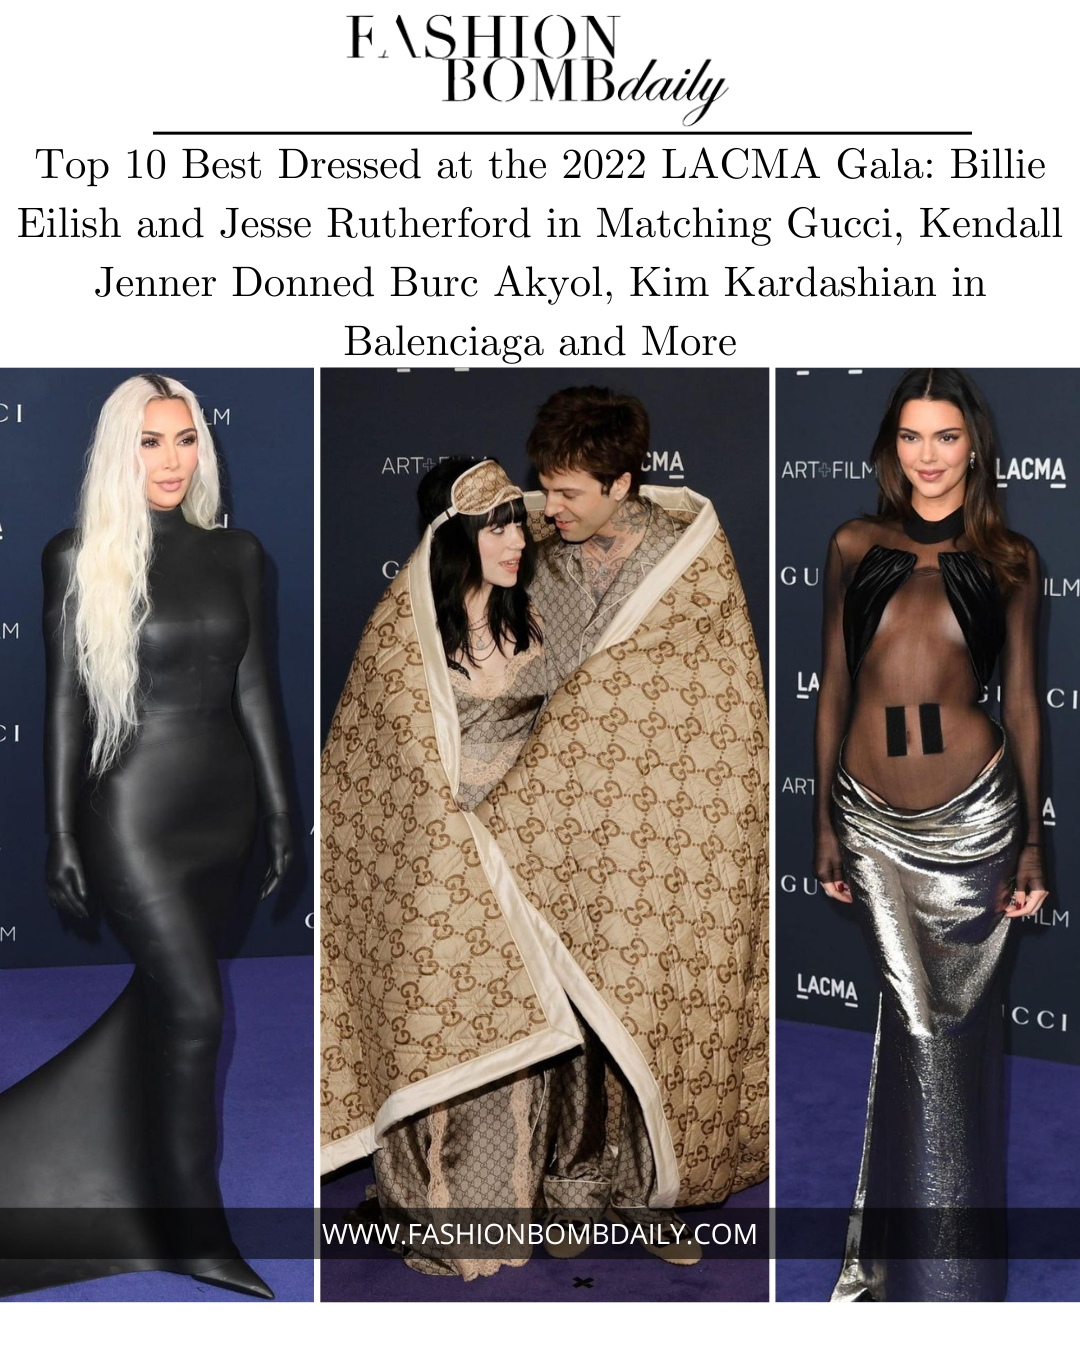 Top 10 Best Dressed at the 2022 LACMA Art + Film Gala: Billie Eilish and Jesse Rutherford in Matching Gucci, Kendall Jenner Donned Burc Akyol, Kim Kardashian in Balenciaga and More